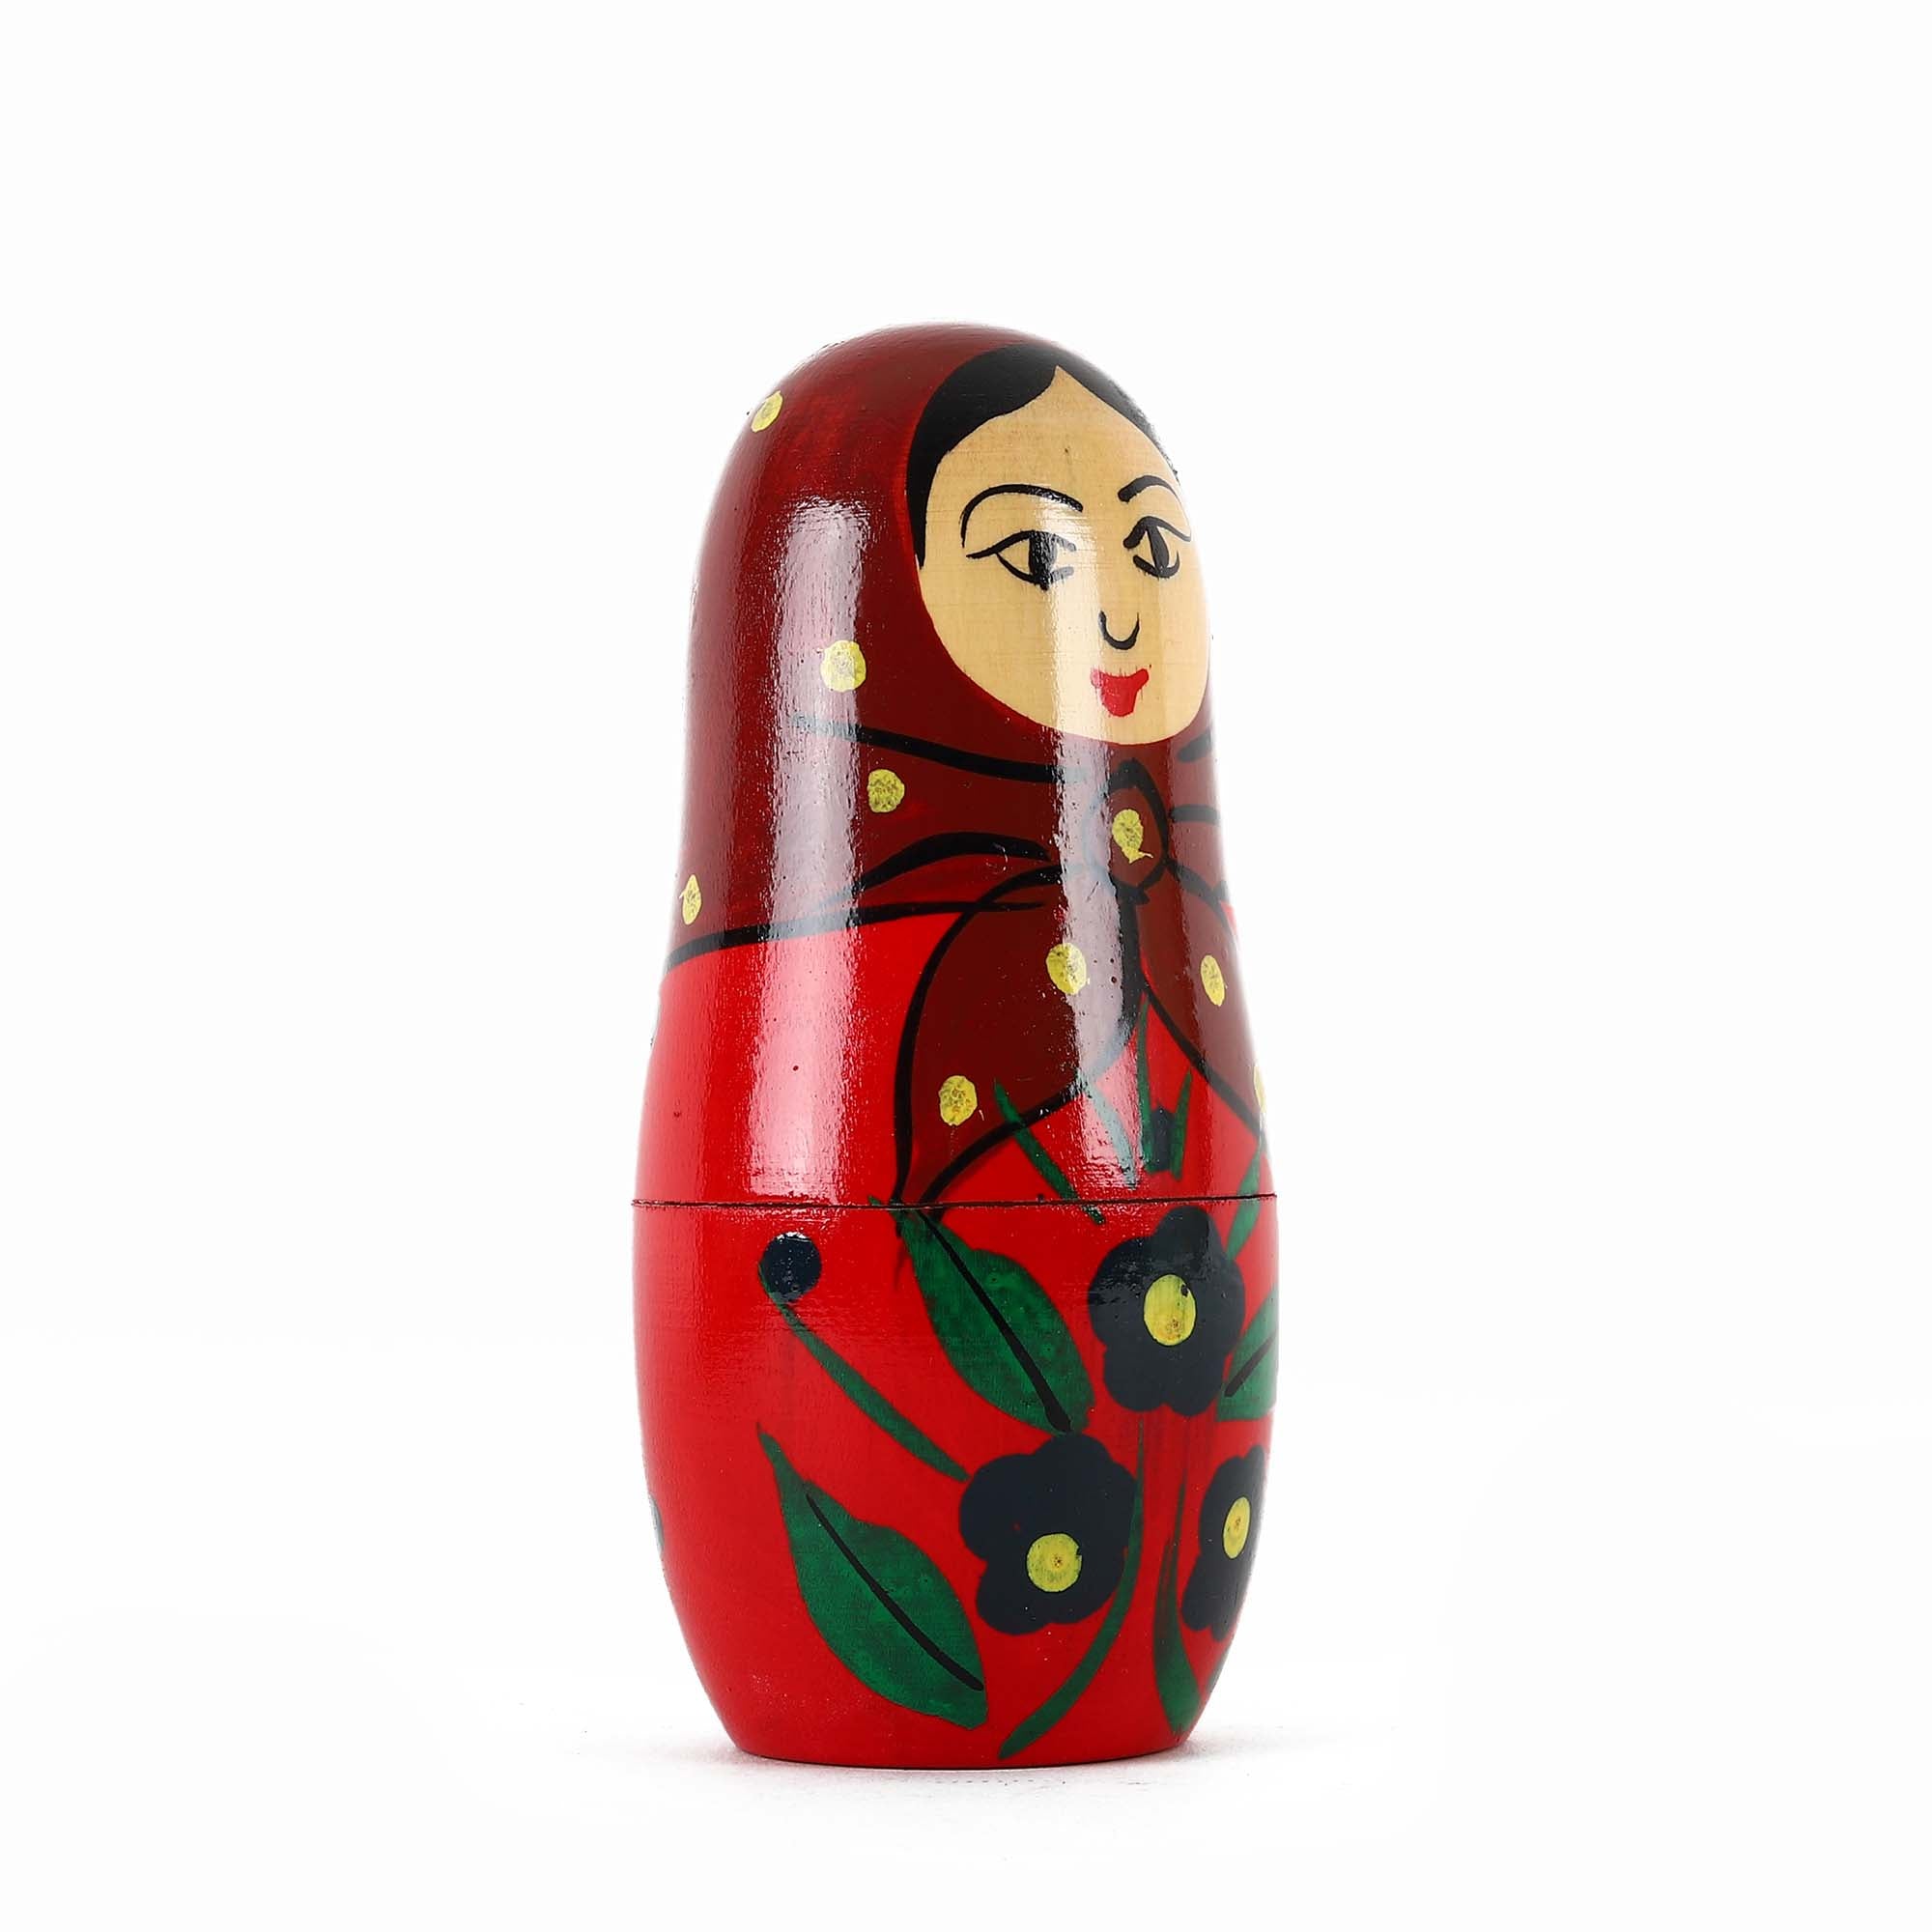 Wooden Russian Nesting Dolls for Kids (2 years+) - 6 Inch Multicolor - Set of 5 pcs - A Magical Journey of Discovery